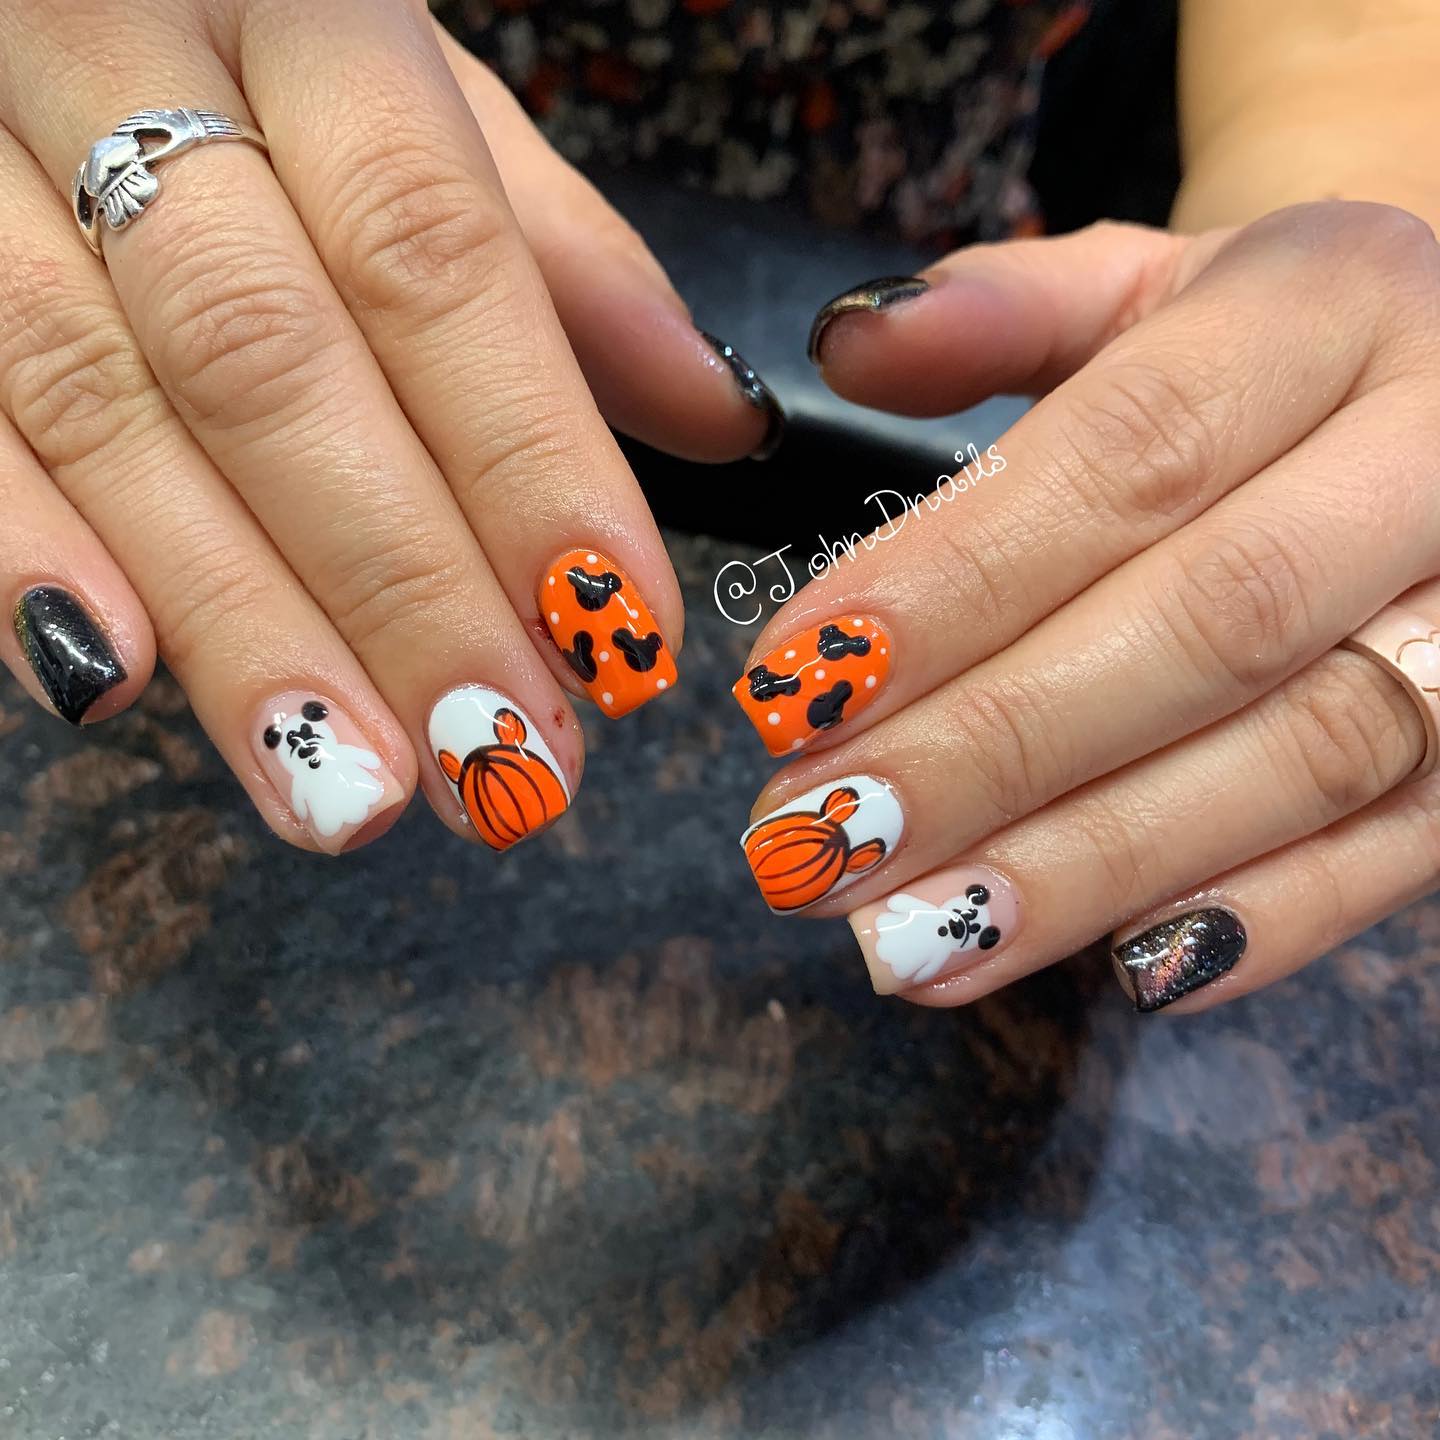 No matter if you go to a Halloween party or any other event, these nails will be a great choice! The cute little pumpkins and the ghosts look like a Mickey, don't they? You should give it a shot.